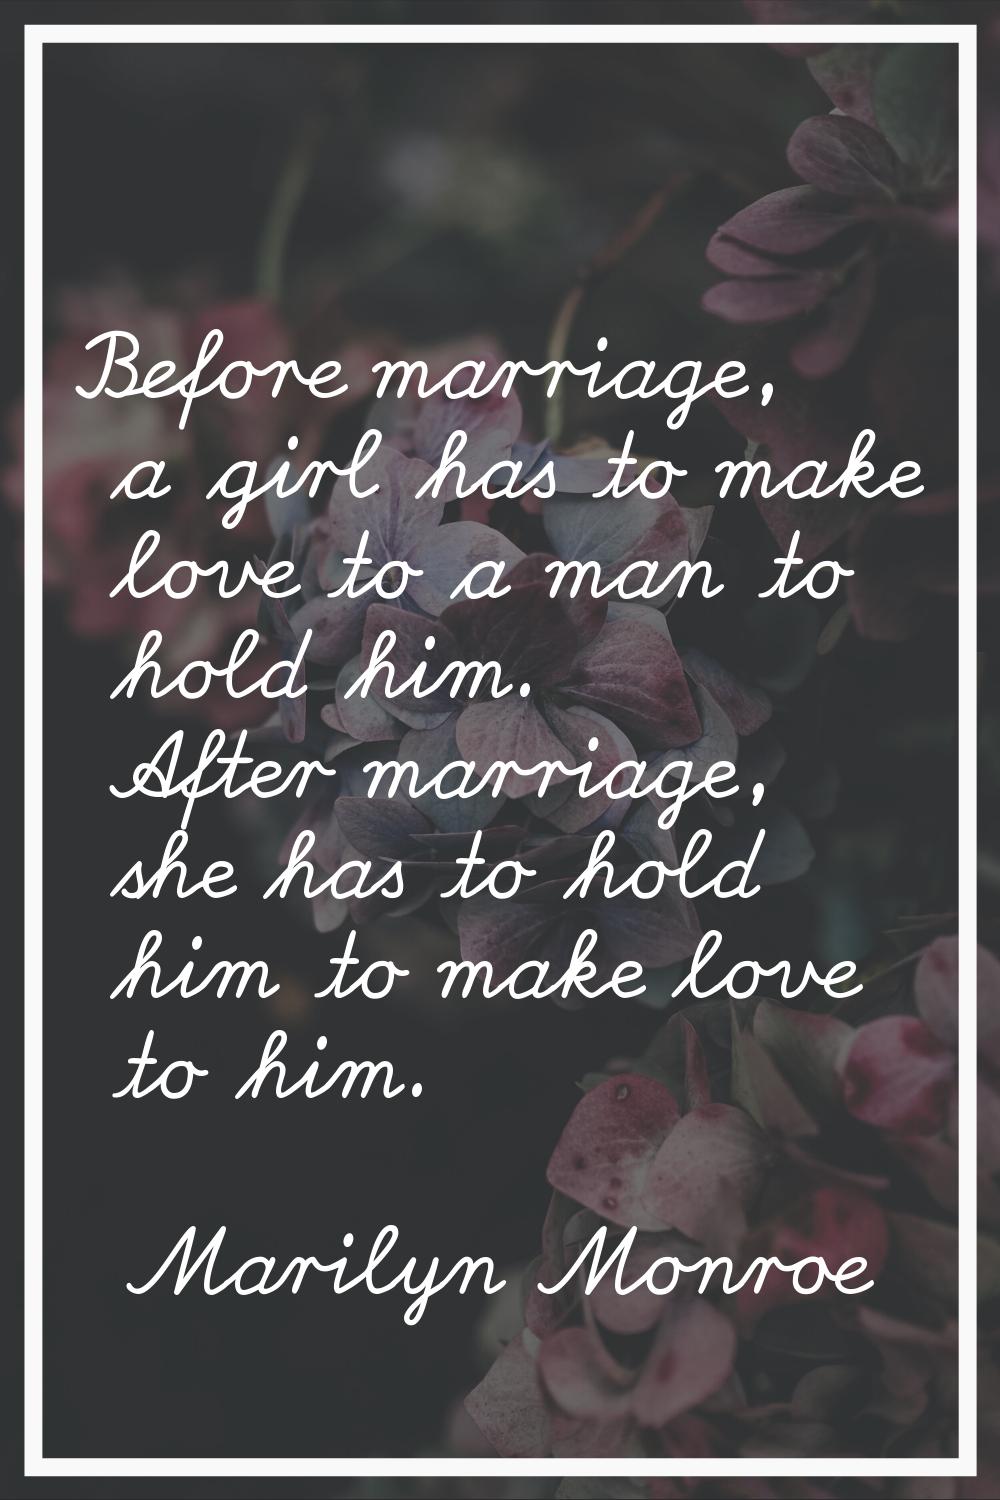 Before marriage, a girl has to make love to a man to hold him. After marriage, she has to hold him 